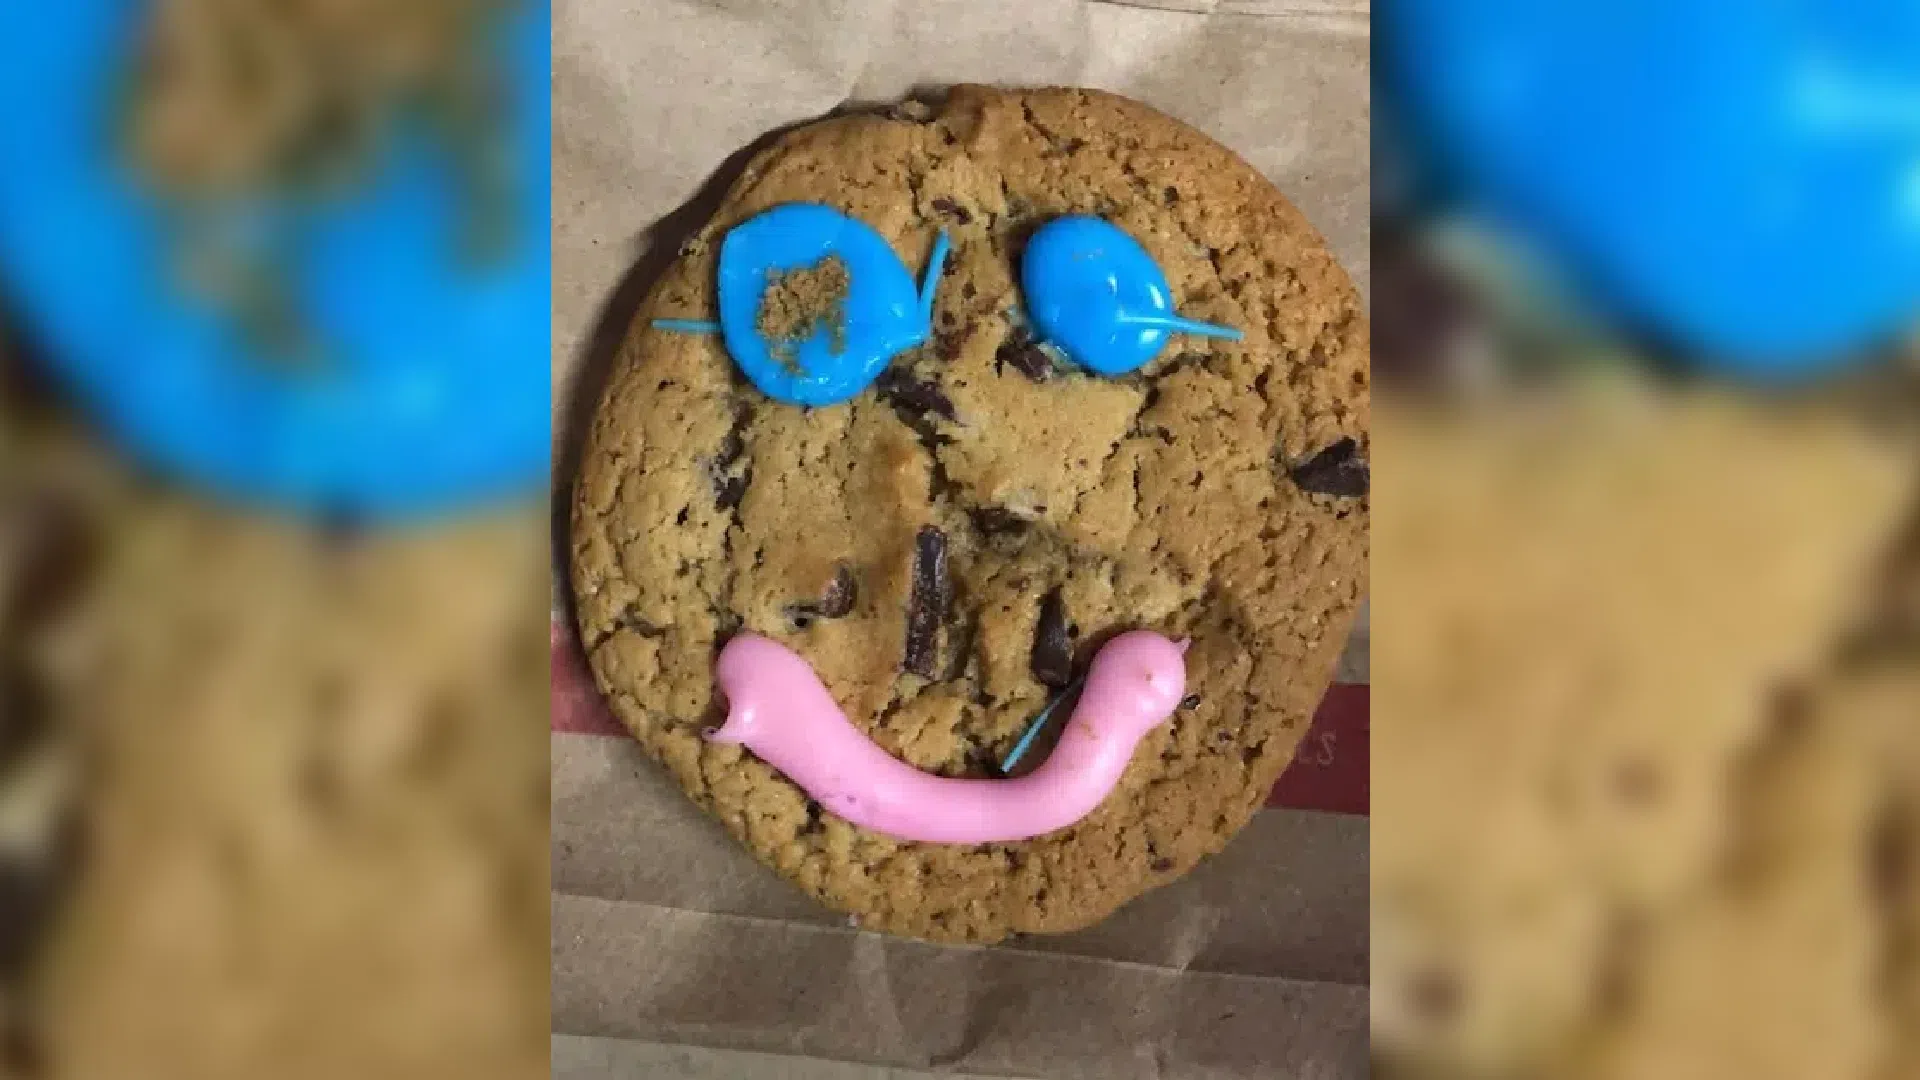 Local organizations benefit from 'Smile Cookie' campaign